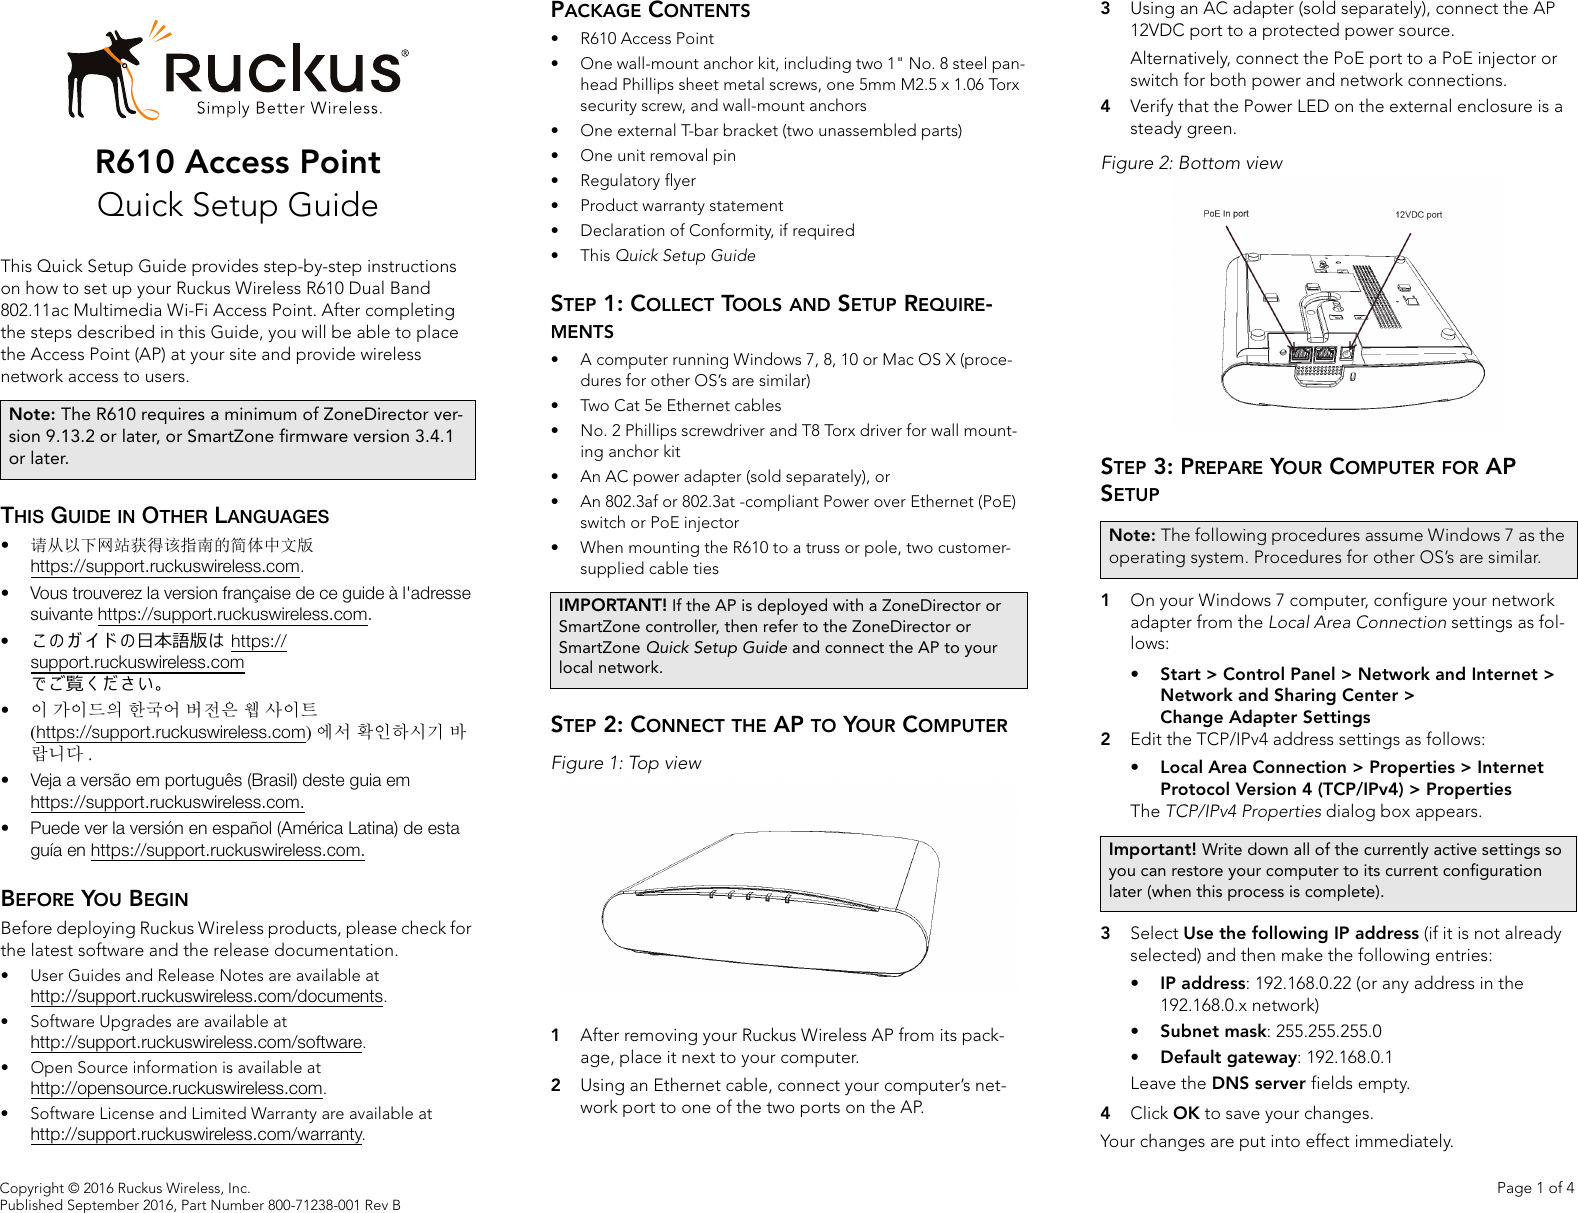 Page 1 of 4 - Ruckus R500 Quick Setup Guide R610 (QSG) R610-QSG